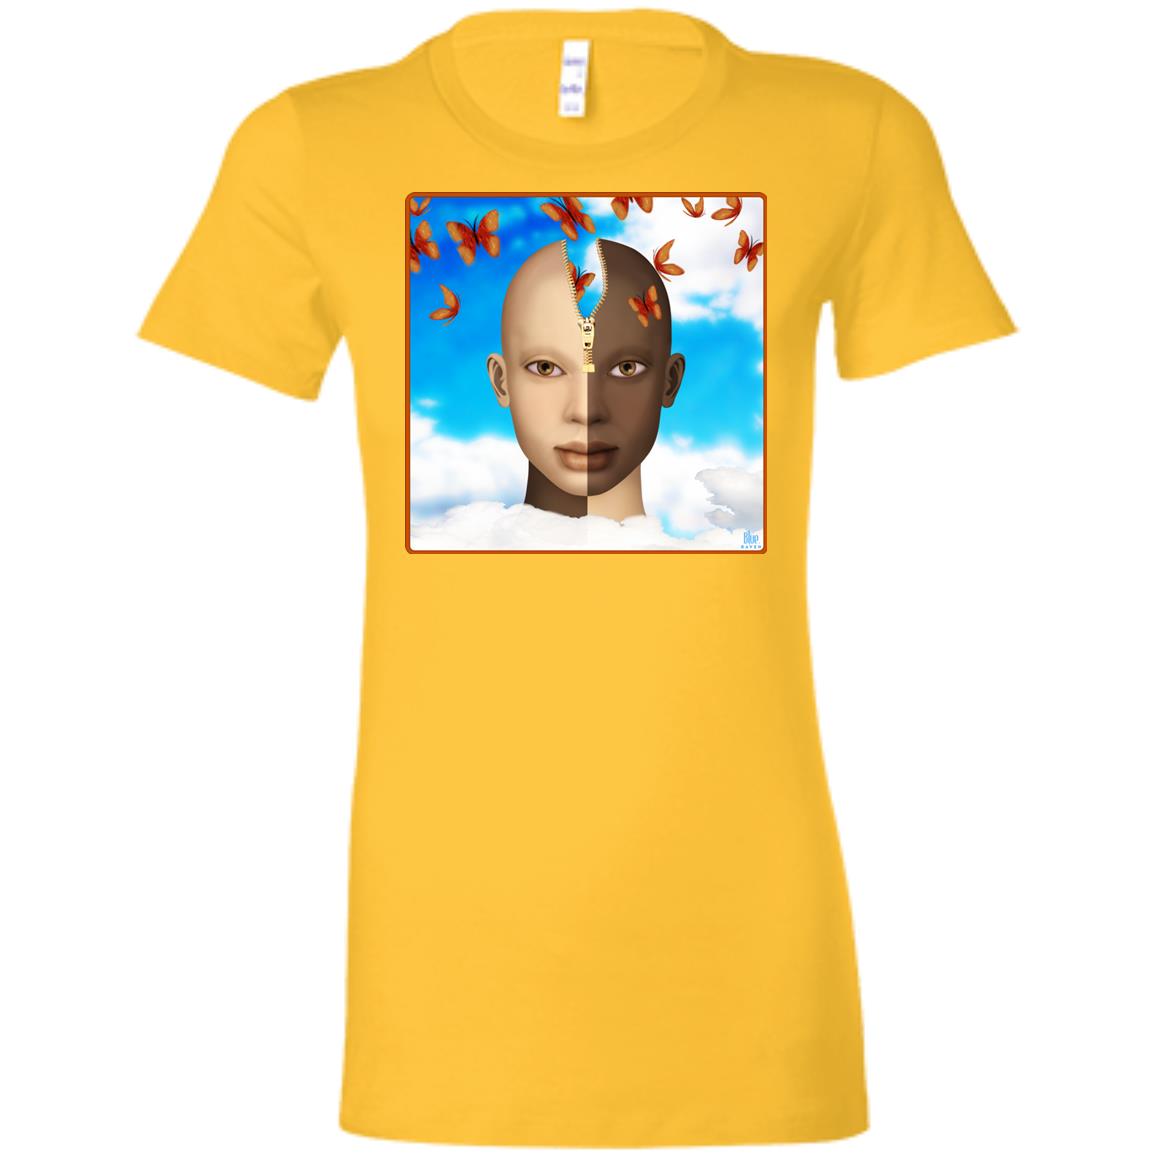 Color Of Our Thoughts - Women's Fitted T-Shirt